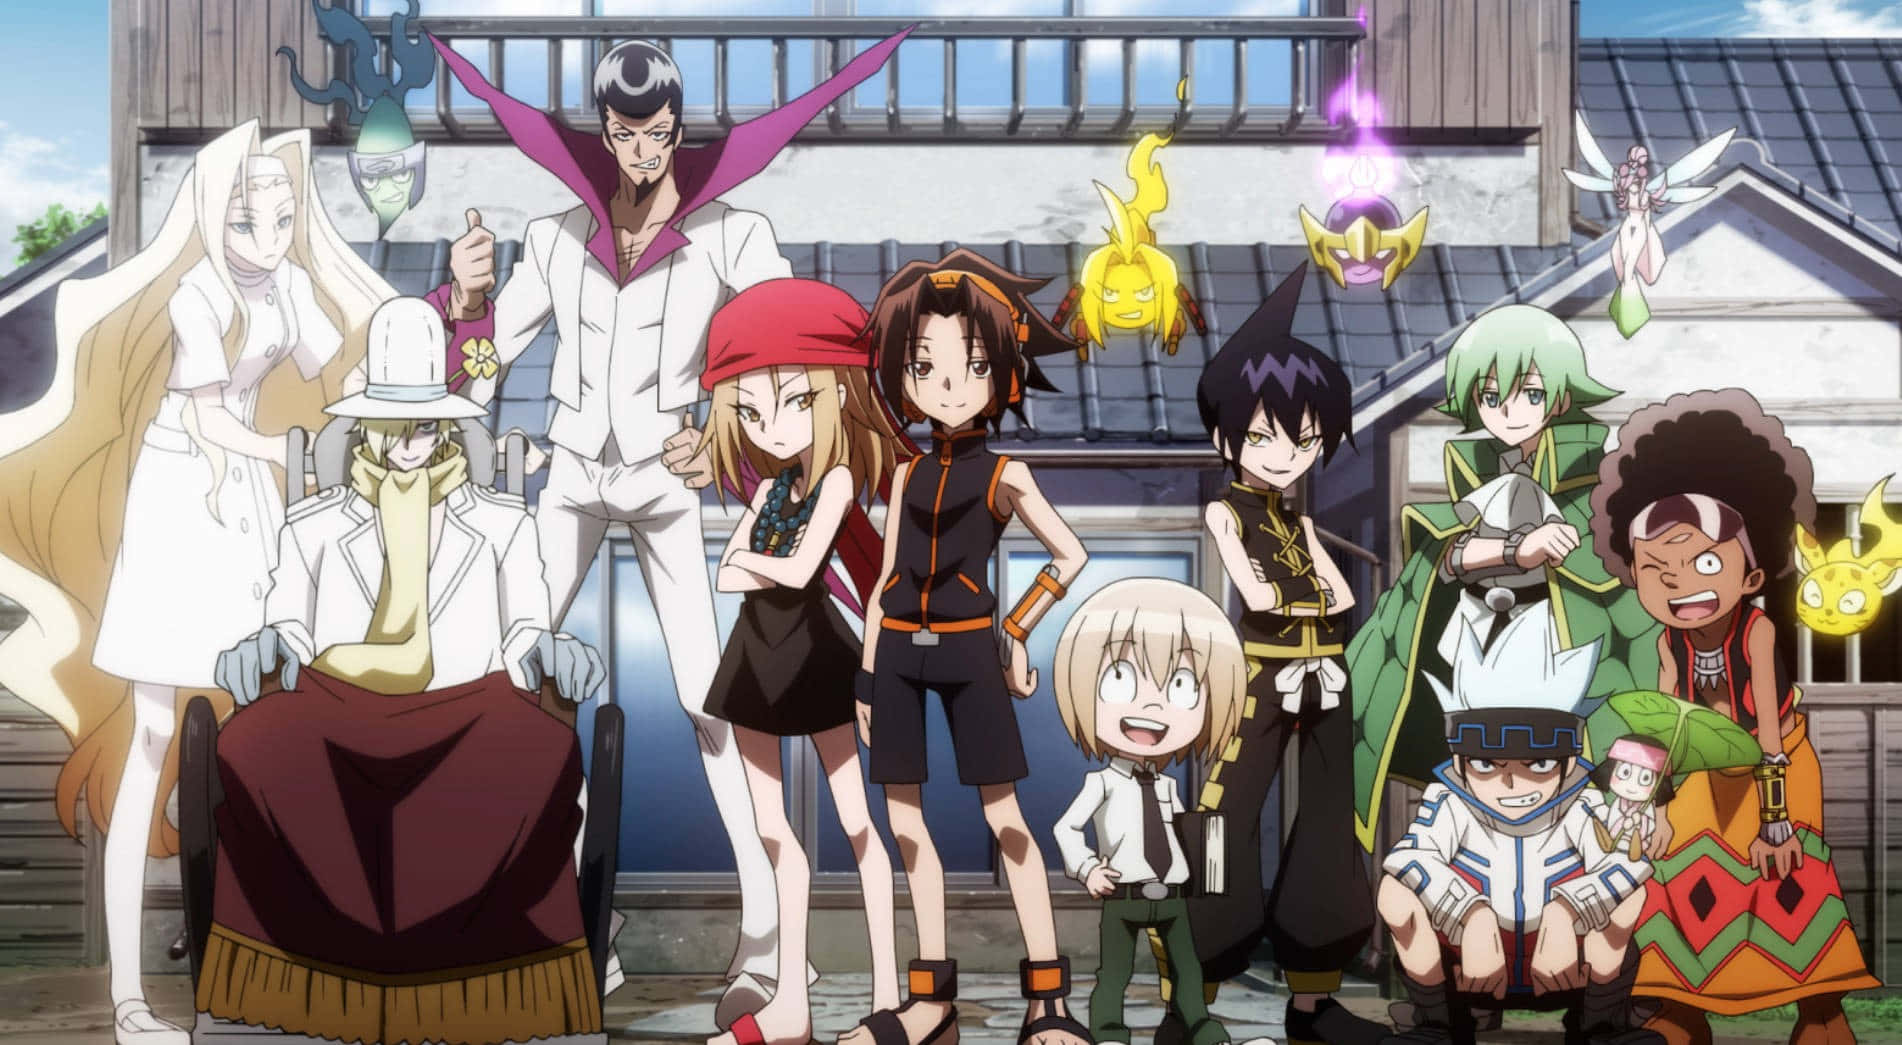 A team of brave warriors embarking on a journey with the Shaman King